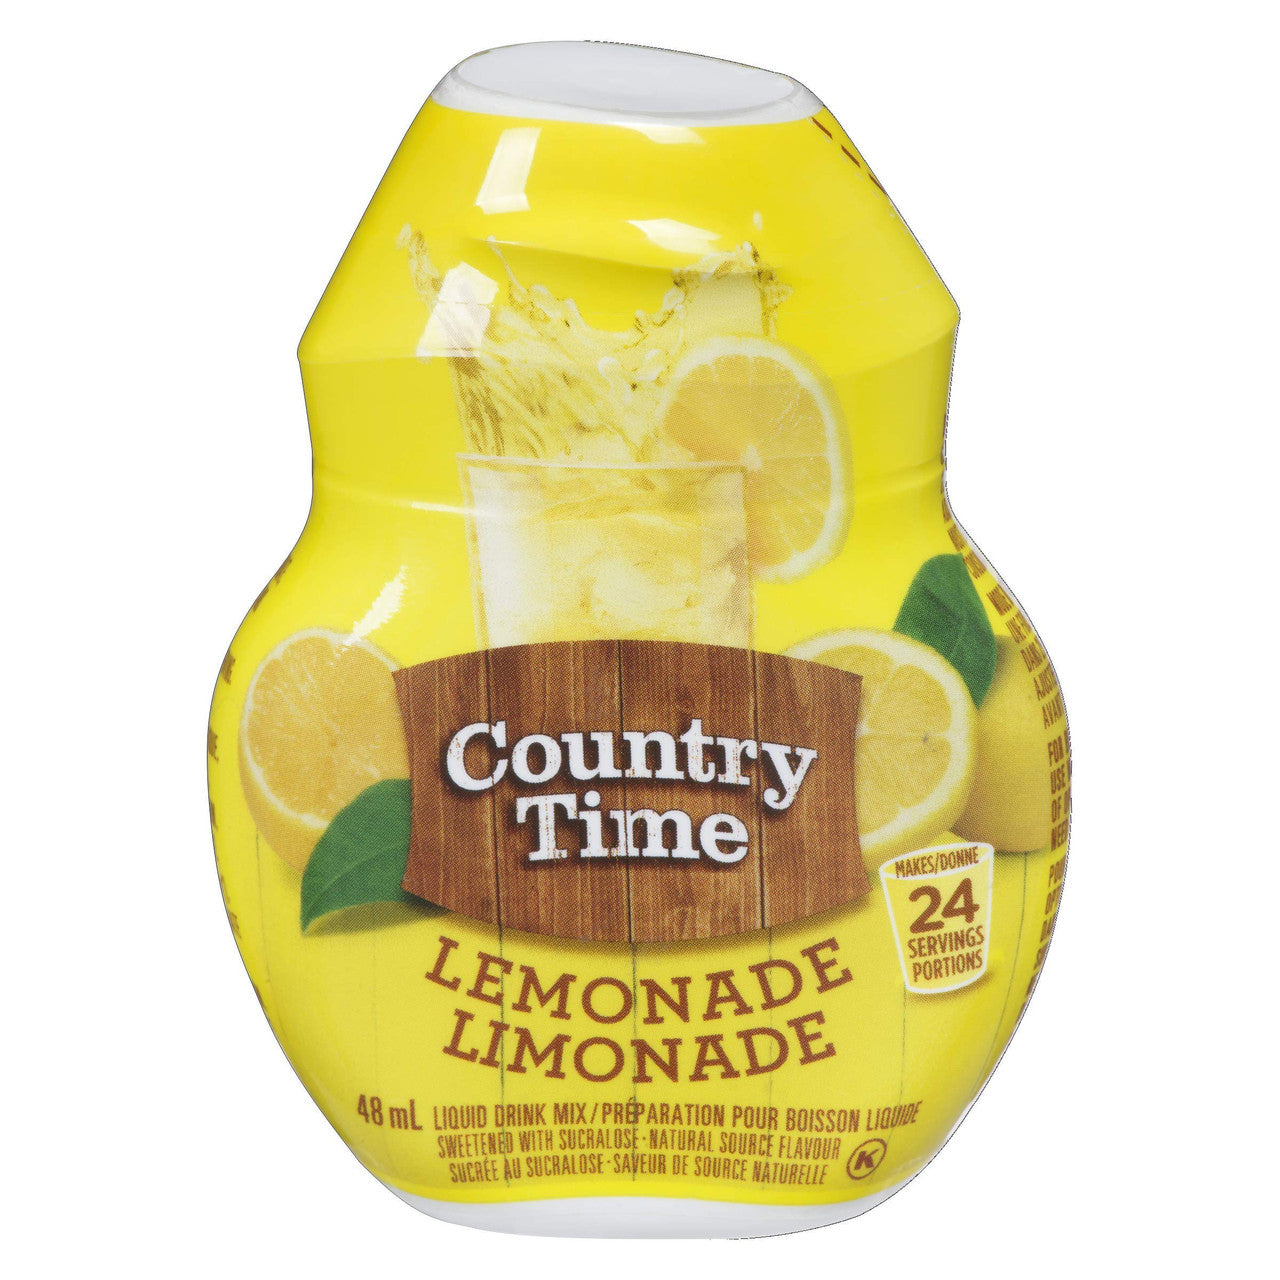 Country Time Liquid Drink Mix, Lemonade, 48mL (Pack of 12), {Imported from Canada}